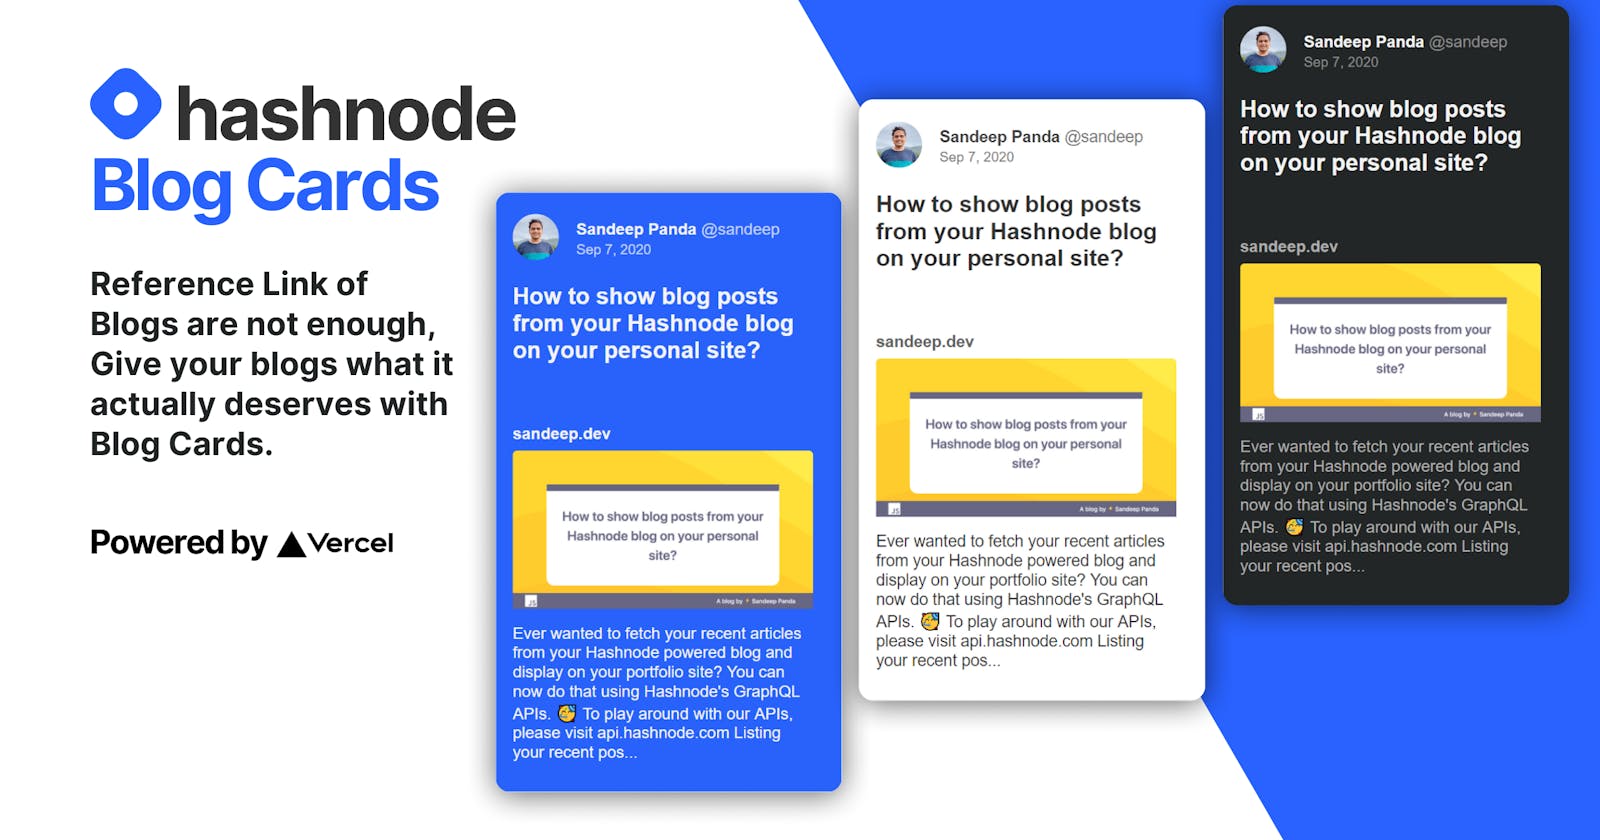 ⚡ Hashnode Blog Cards 🚀 Reference Link 🔗 of Blogs are not enough, Give your blogs what it deserves with Blog Cards